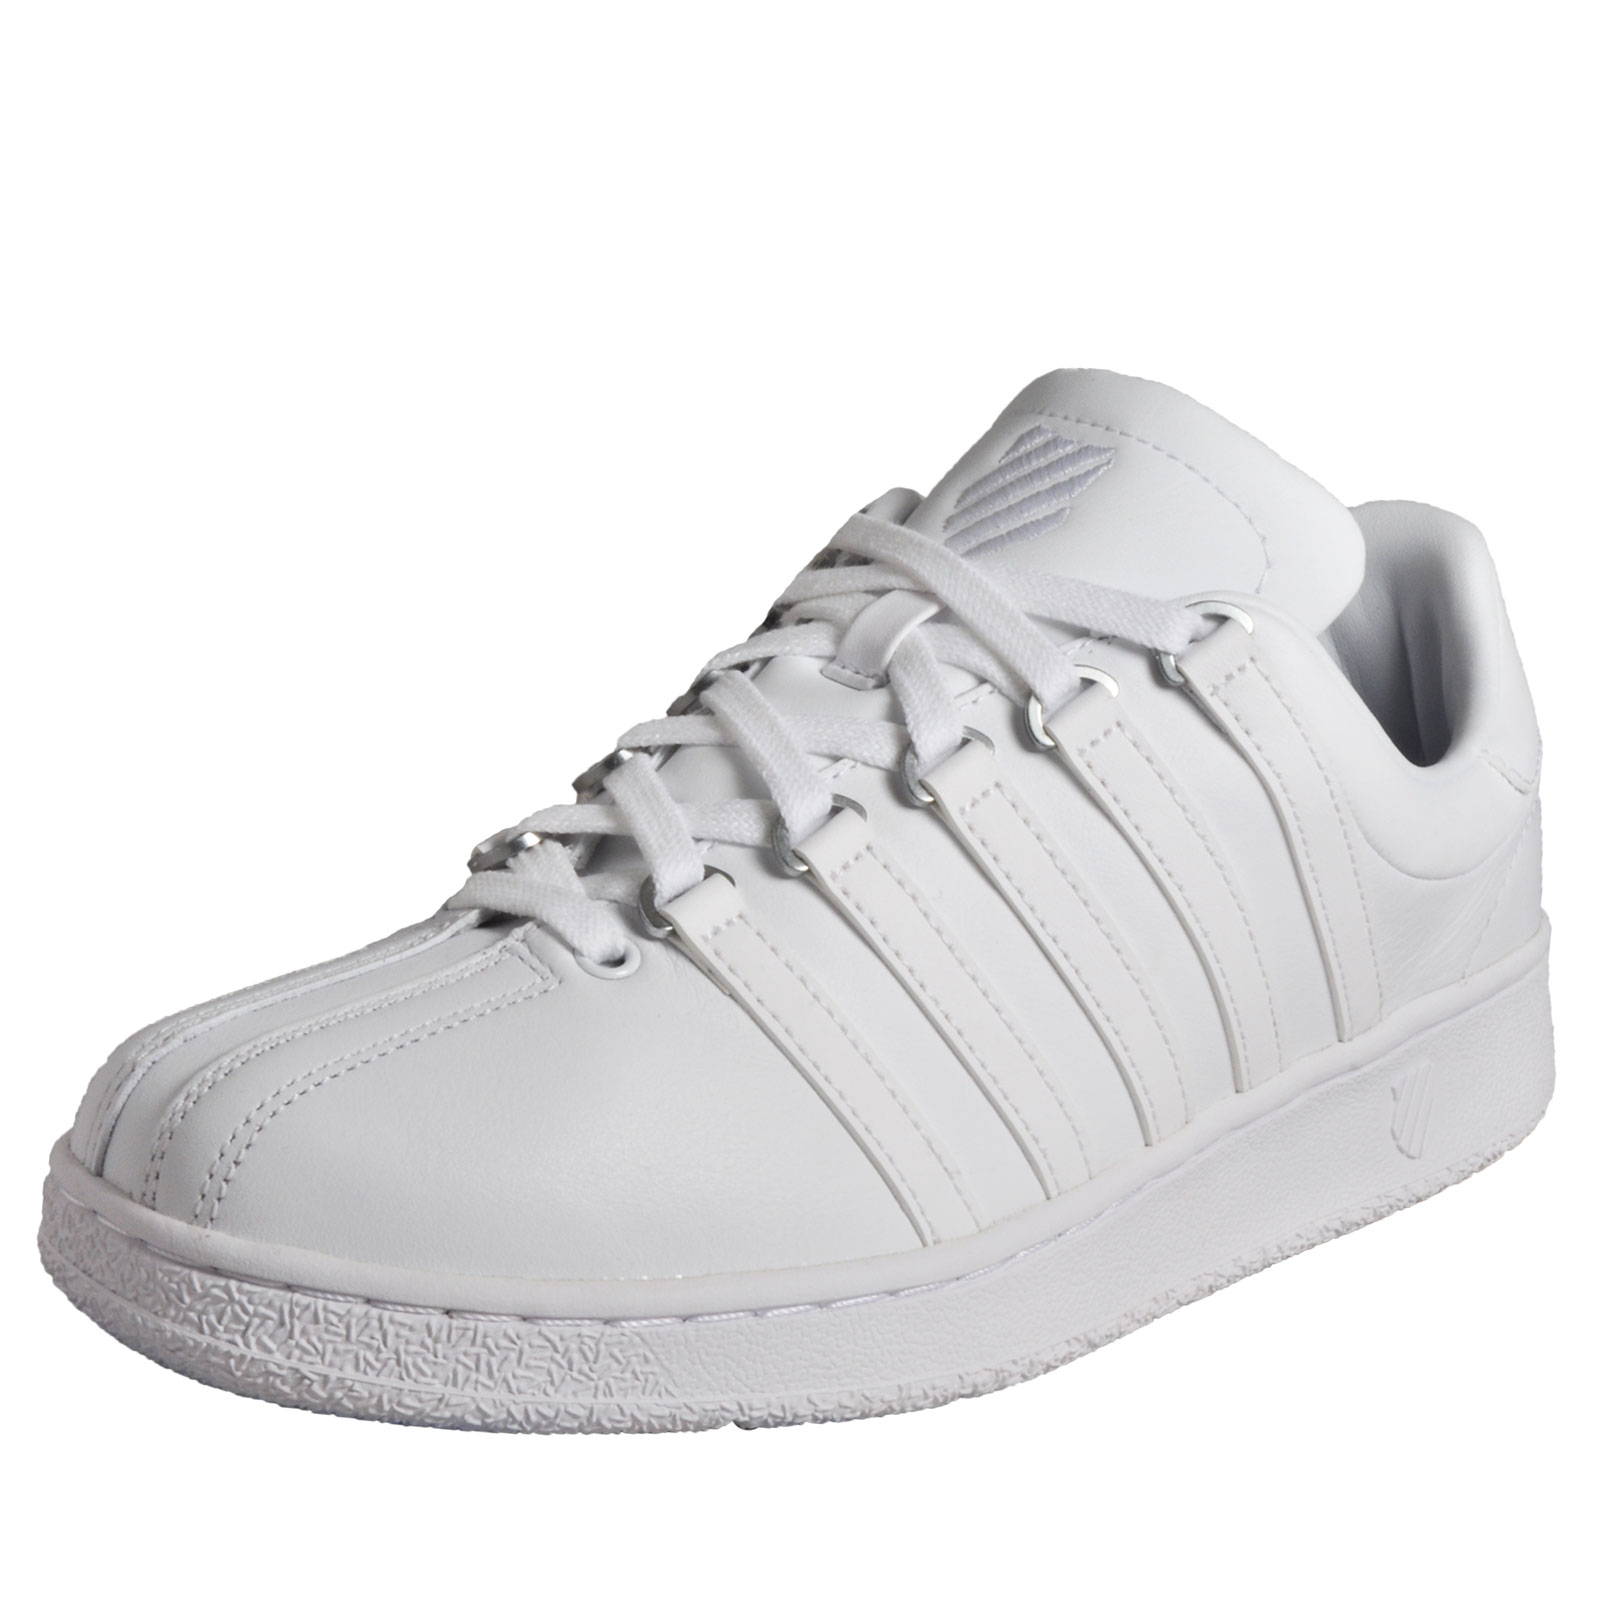 K Swiss Classic Vintage Men's Leather Casual Leather Retro Trainers ...